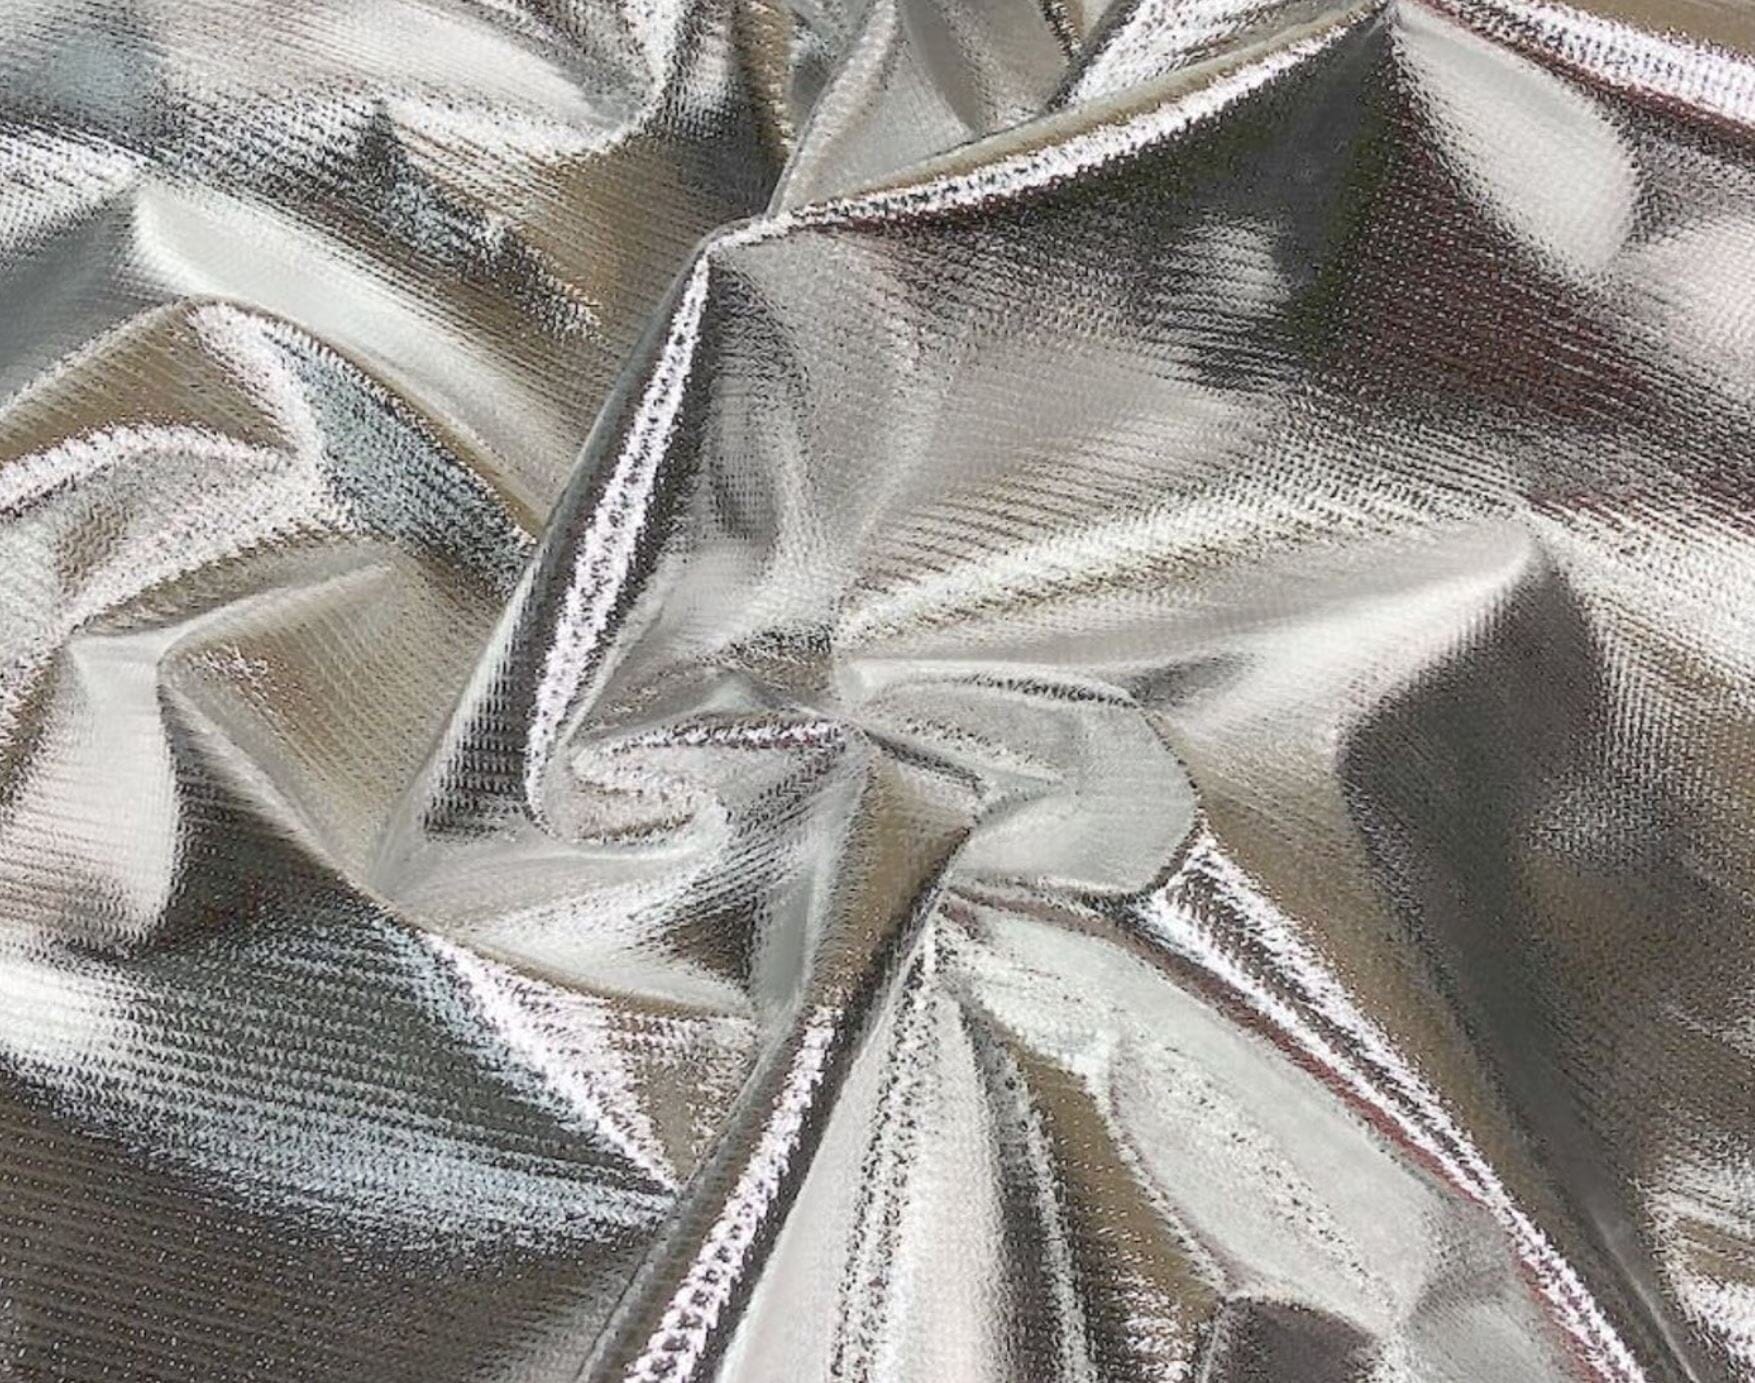 Tricot Lame Fabric | Stiff Metallic Foil | 40" Wide | Dress Material Dance Wear Costume Theatrical | Fabric mytextilefabric 3"x3" Sample Swatch Silver White Tricot 